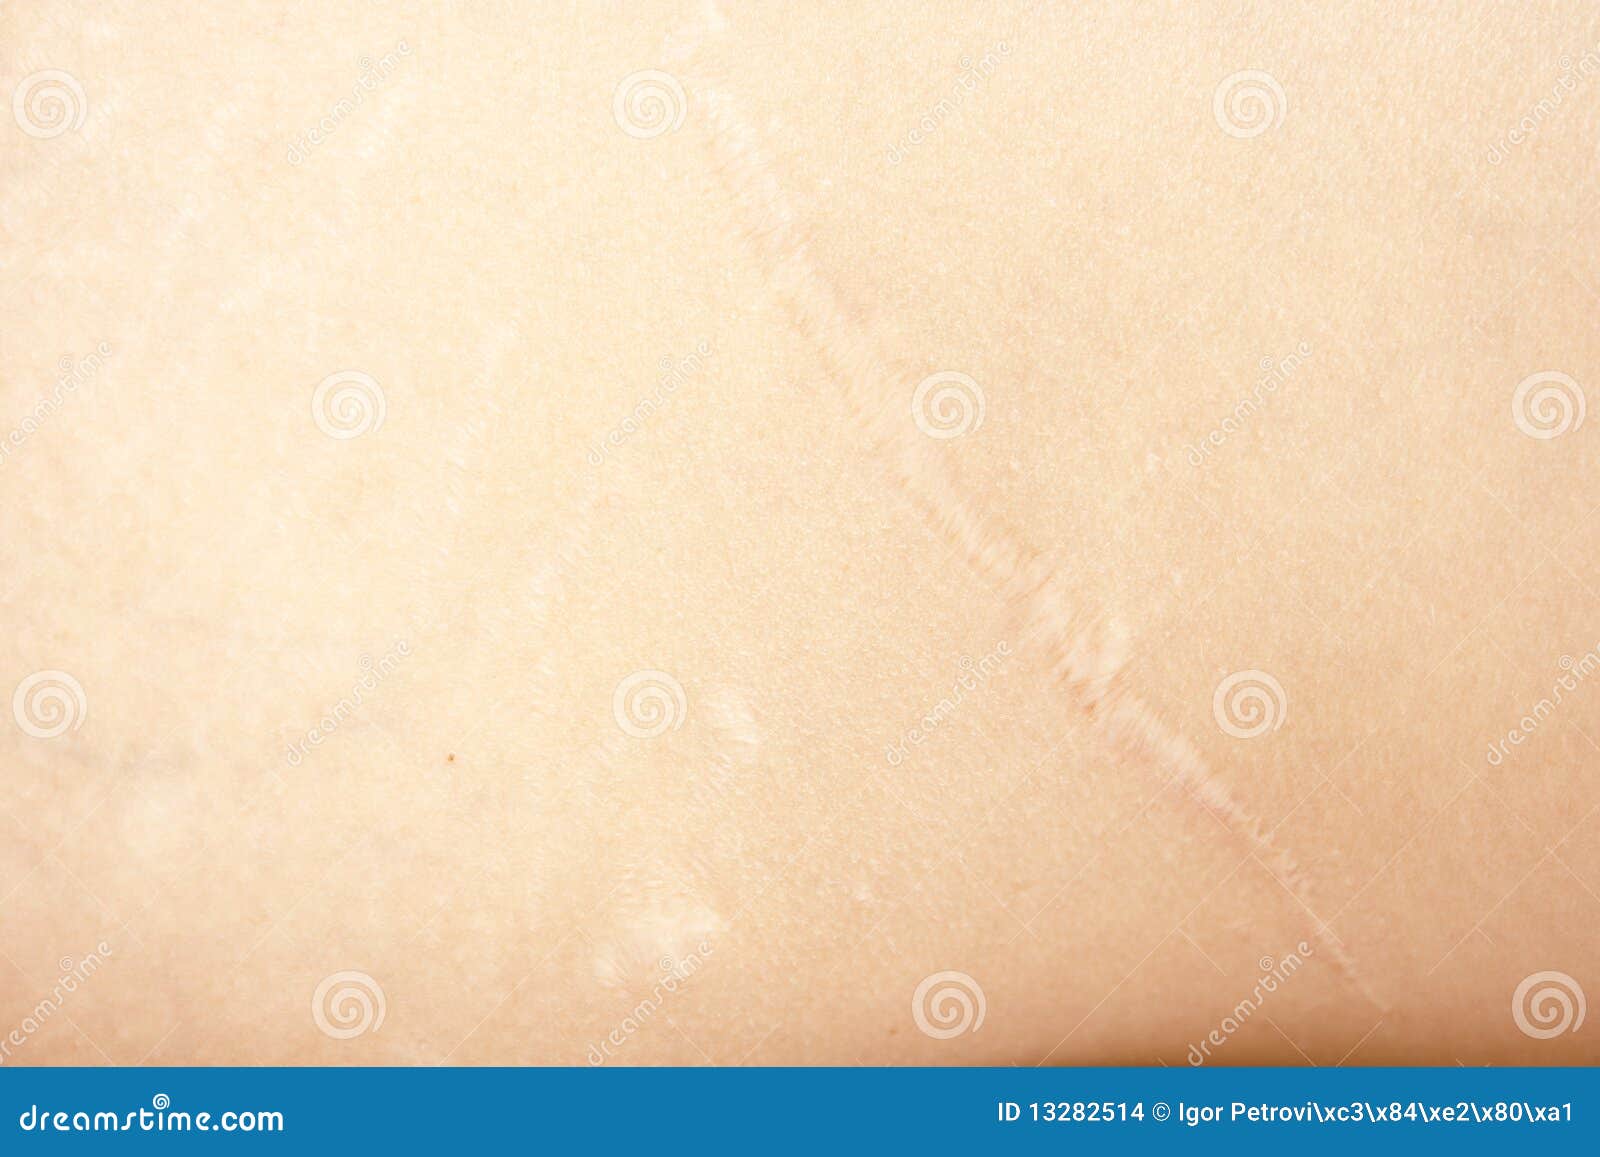 Kidney Operation Scar Stock Photo Image Of Woman Scar 13282514